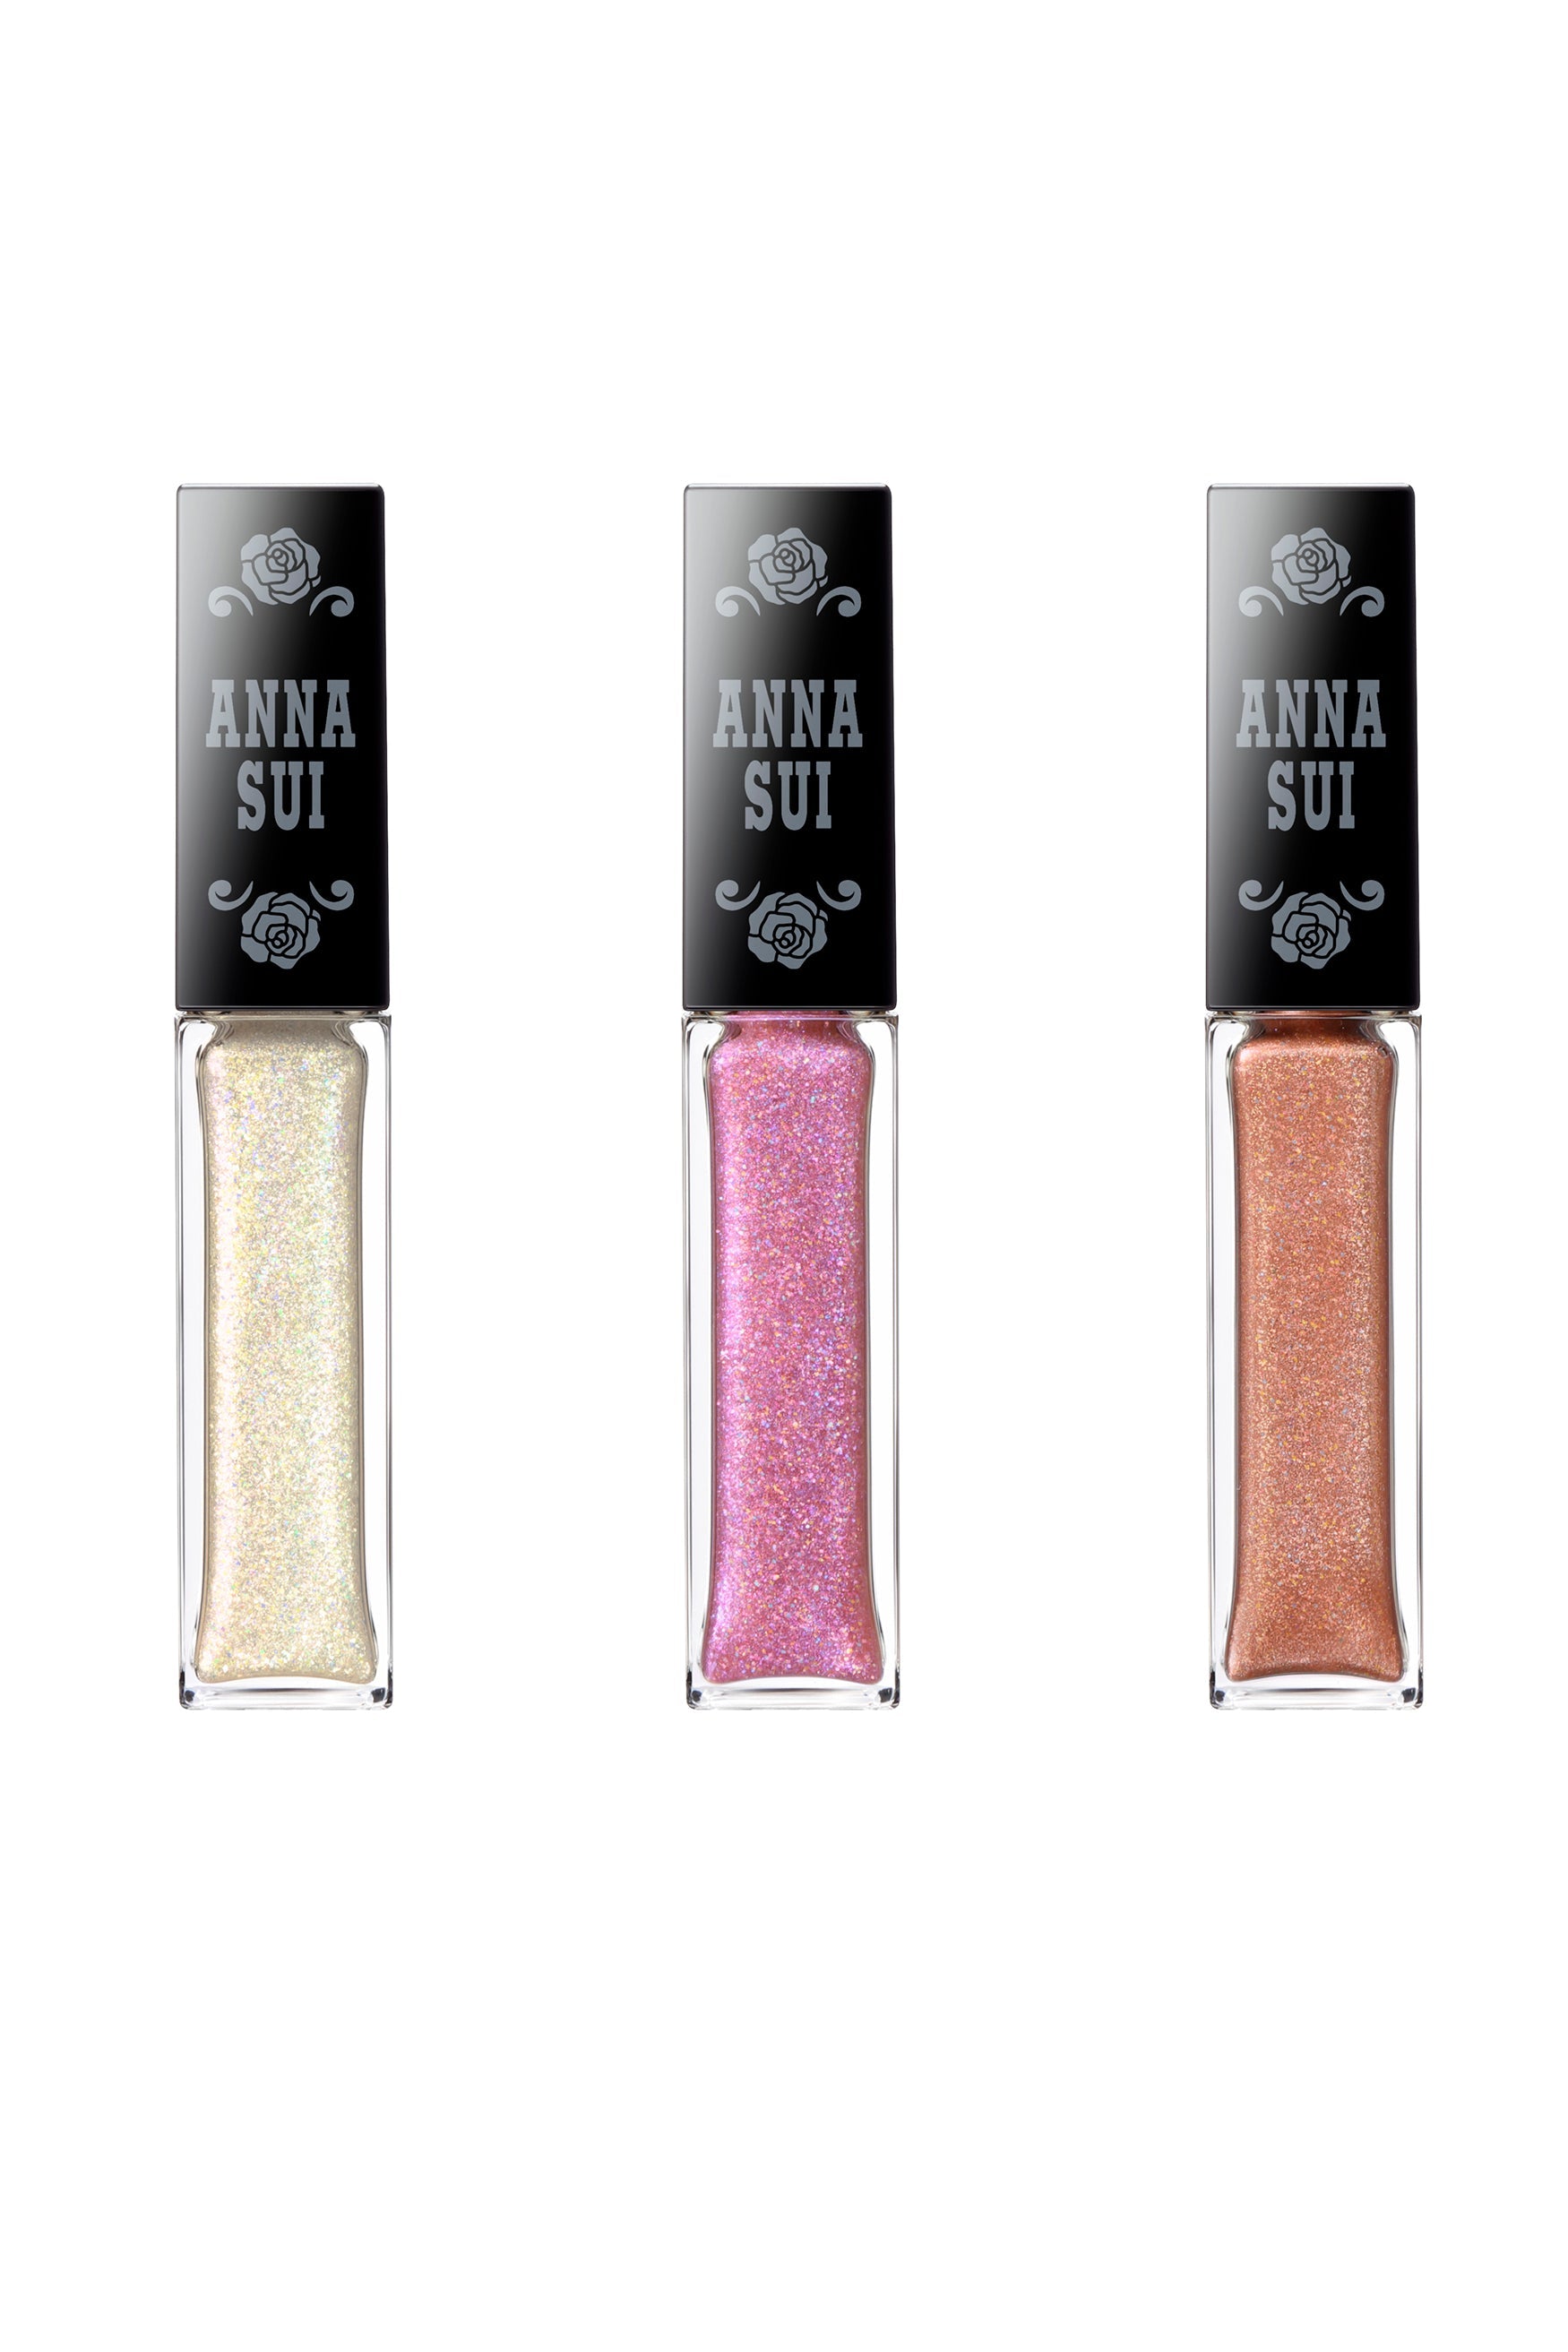 Pearlescent white, pink parade, Honey glow in transparent bottle, white roses & Anna Sui label